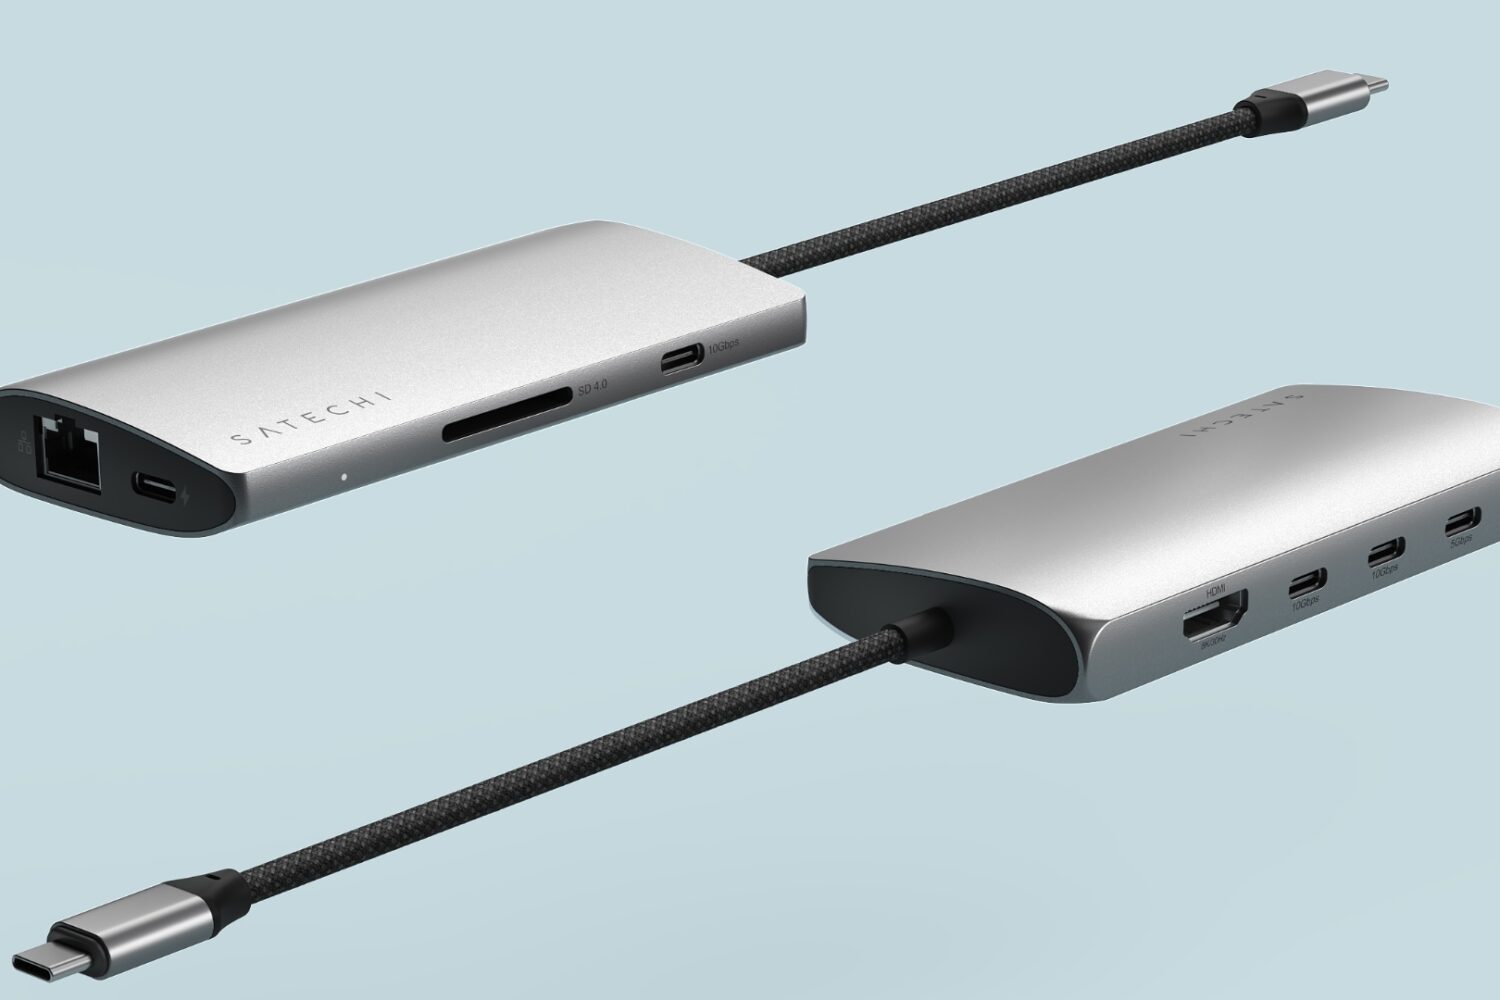 Satechi's USB-C adapters showcasing the front and back ports